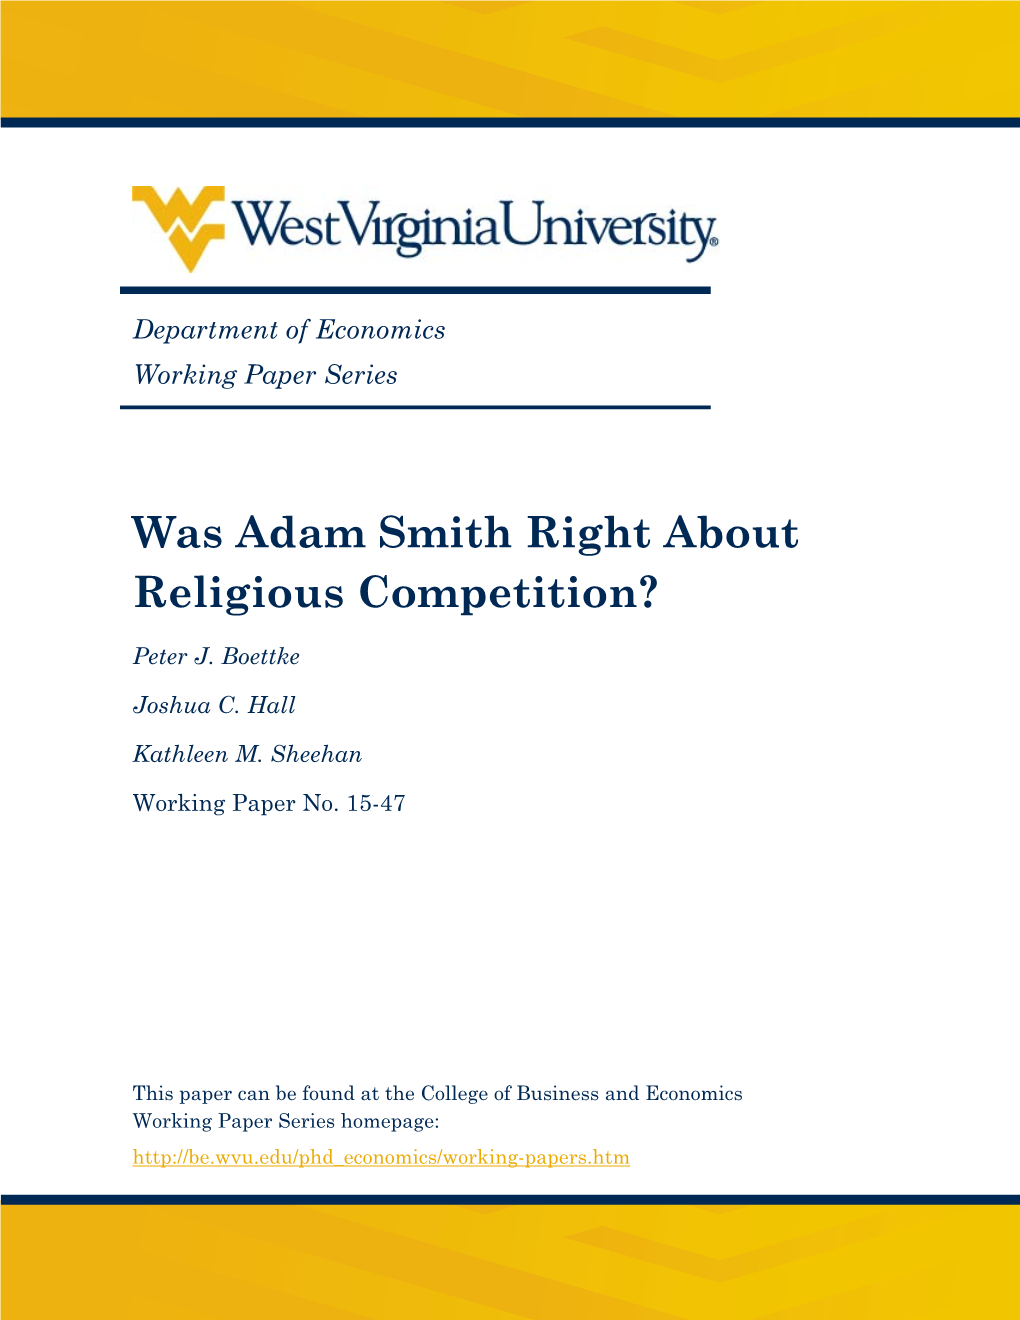 Was Adam Smith Right About Religious Competition?